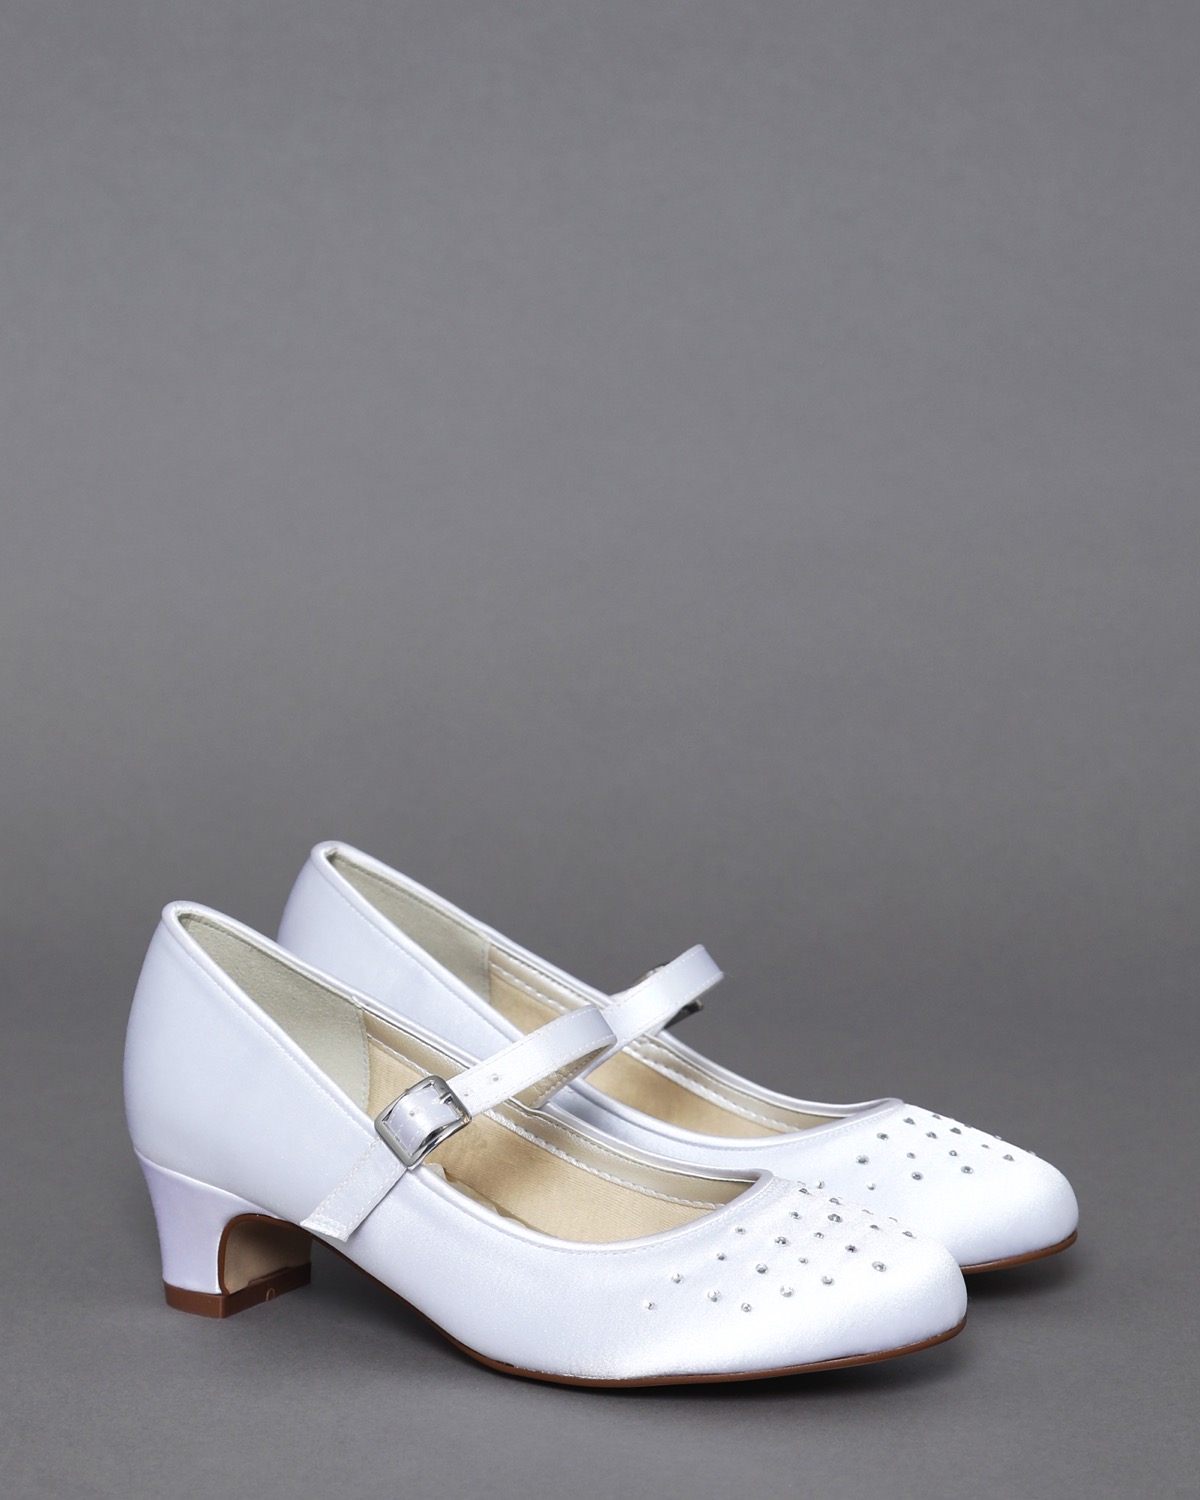 caprice shoes dunnes stores